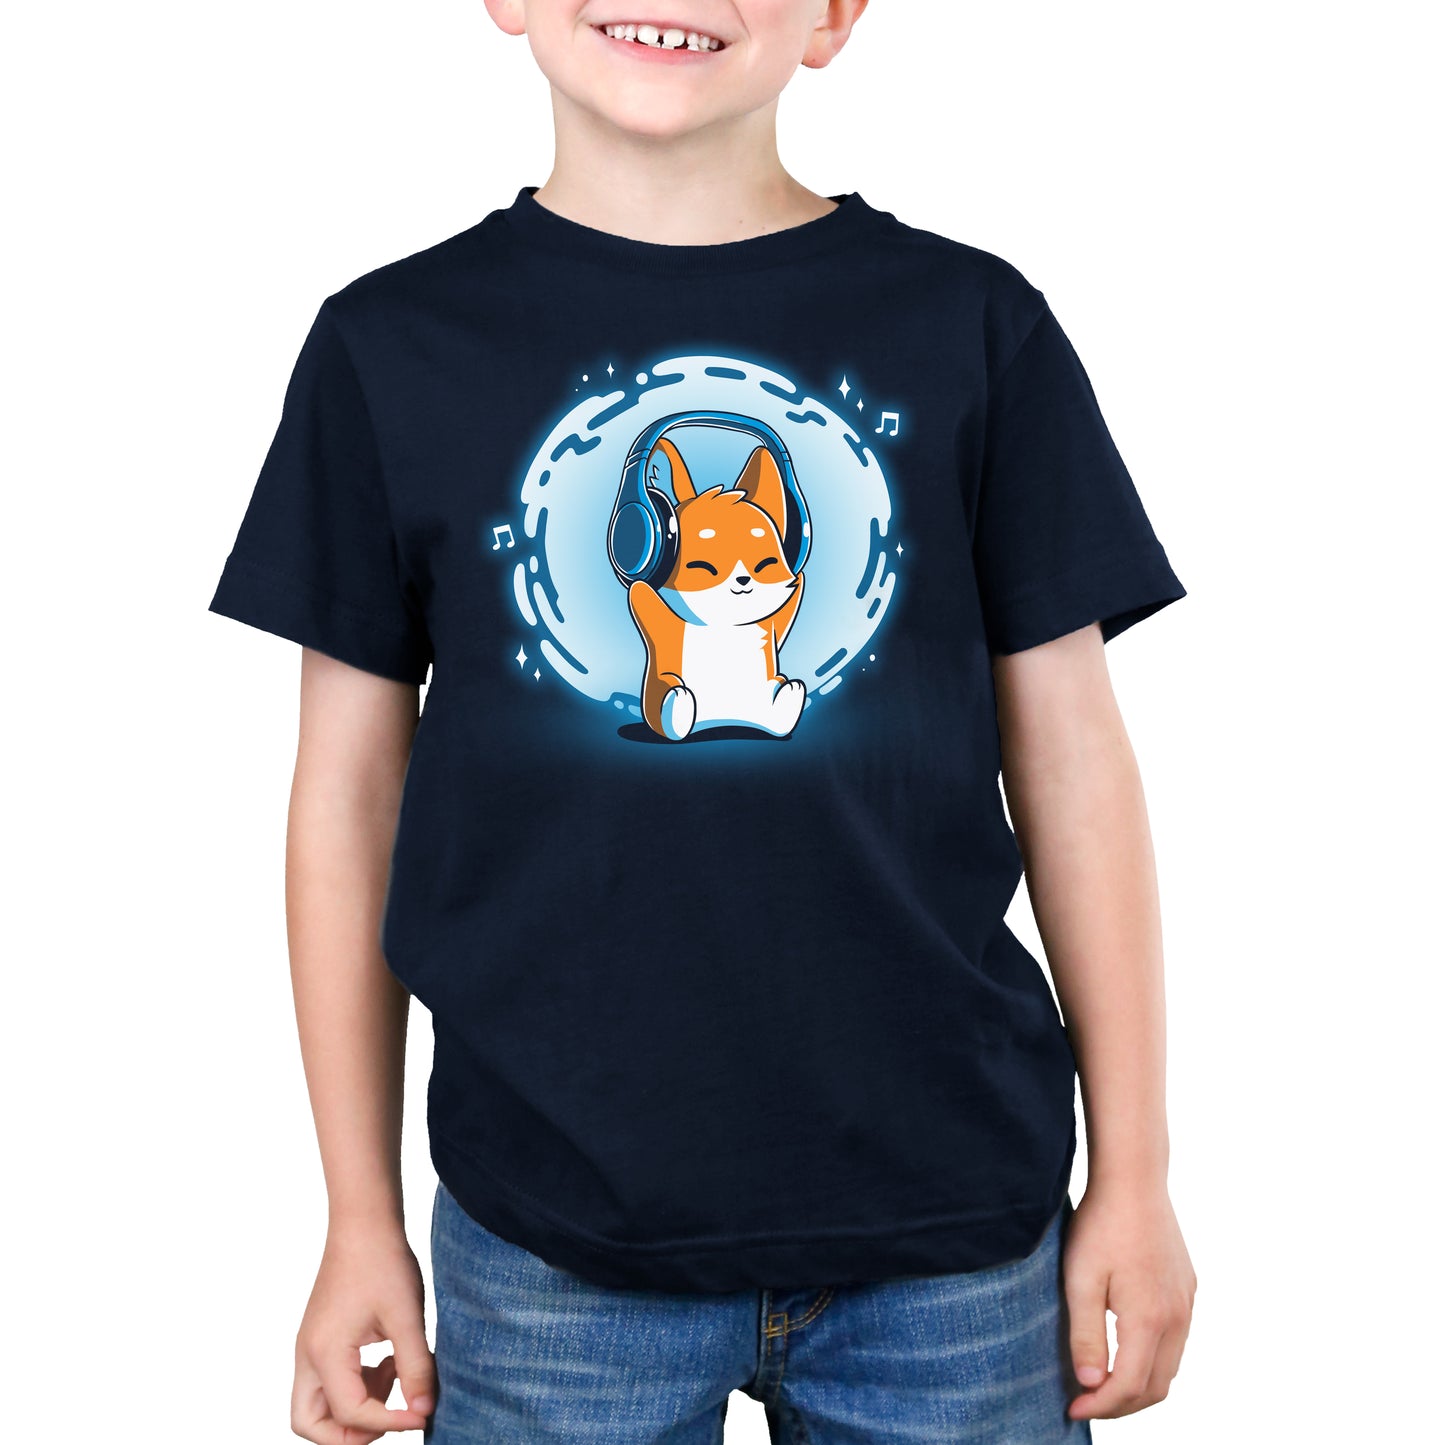 A young boy wearing a Surrounded by Music (GLOW) t-shirt from TeeTurtle, with a corgi on it.